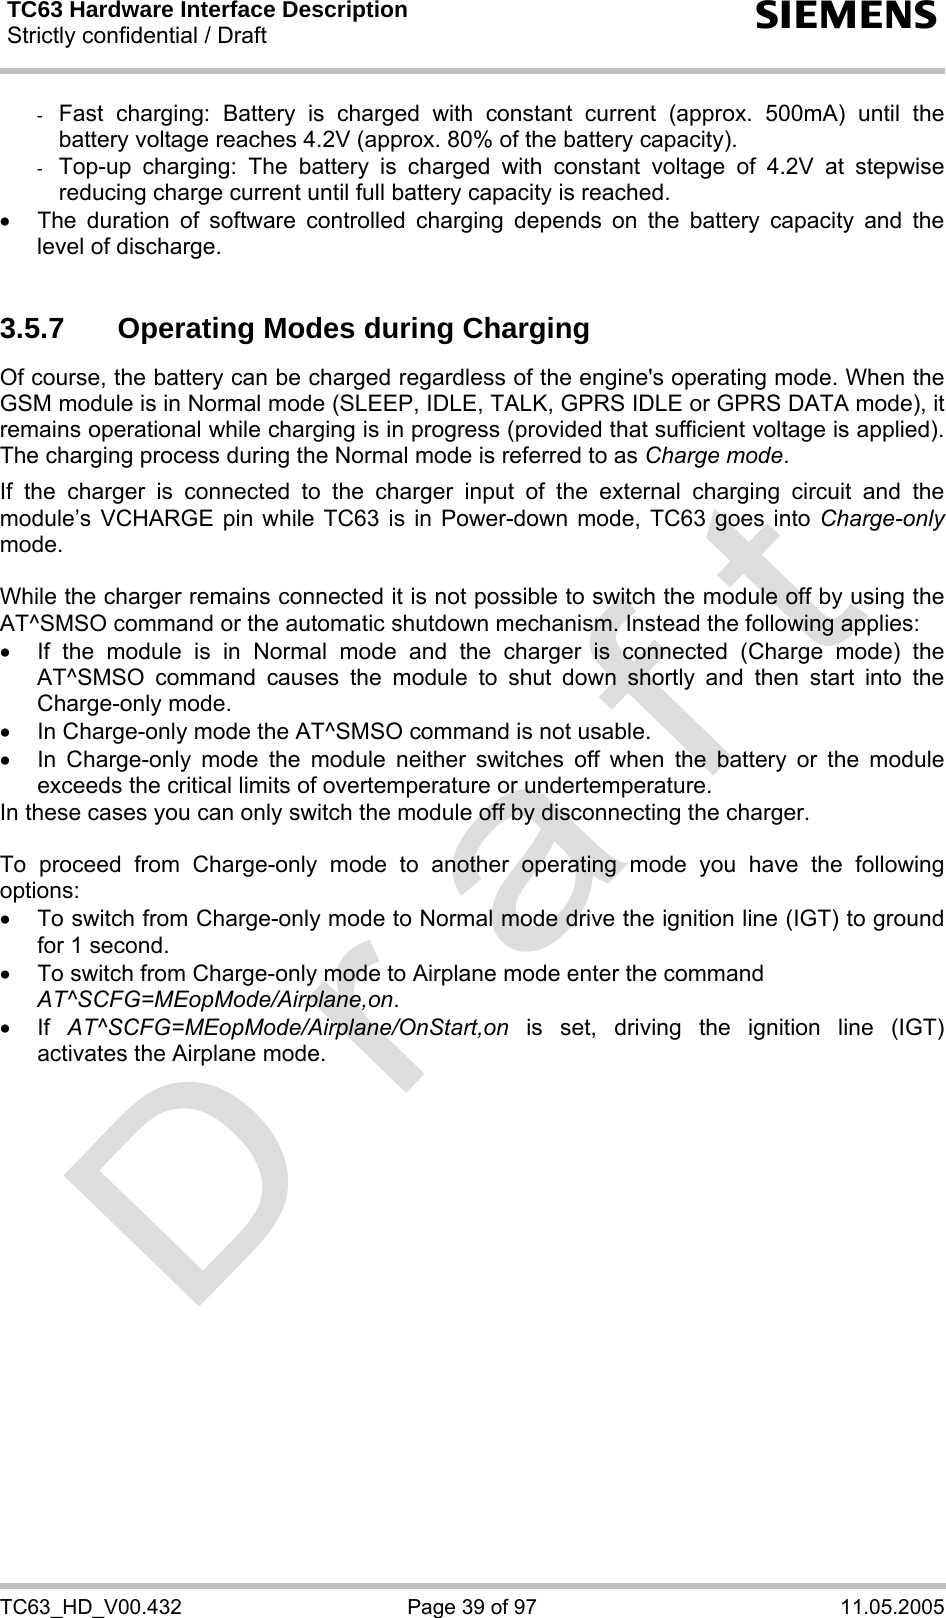 TC63 Hardware Interface Description Strictly confidential / Draft  s TC63_HD_V00.432  Page 39 of 97  11.05.2005 -  Fast charging: Battery is charged with constant current (approx. 500mA) until the battery voltage reaches 4.2V (approx. 80% of the battery capacity).  -  Top-up charging: The battery is charged with constant voltage of 4.2V at stepwise reducing charge current until full battery capacity is reached.  •  The duration of software controlled charging depends on the battery capacity and the level of discharge.   3.5.7  Operating Modes during Charging Of course, the battery can be charged regardless of the engine&apos;s operating mode. When the GSM module is in Normal mode (SLEEP, IDLE, TALK, GPRS IDLE or GPRS DATA mode), it remains operational while charging is in progress (provided that sufficient voltage is applied). The charging process during the Normal mode is referred to as Charge mode.   If the charger is connected to the charger input of the external charging circuit and the module’s VCHARGE pin while TC63 is in Power-down mode, TC63 goes into Charge-only mode.   While the charger remains connected it is not possible to switch the module off by using the AT^SMSO command or the automatic shutdown mechanism. Instead the following applies: •  If the module is in Normal mode and the charger is connected (Charge mode) the AT^SMSO command causes the module to shut down shortly and then start into the Charge-only mode. •  In Charge-only mode the AT^SMSO command is not usable.  •  In Charge-only mode the module neither switches off when the battery or the module exceeds the critical limits of overtemperature or undertemperature.  In these cases you can only switch the module off by disconnecting the charger.  To proceed from Charge-only mode to another operating mode you have the following options: •  To switch from Charge-only mode to Normal mode drive the ignition line (IGT) to ground for 1 second.  •  To switch from Charge-only mode to Airplane mode enter the command  AT^SCFG=MEopMode/Airplane,on.  • If AT^SCFG=MEopMode/Airplane/OnStart,on is set, driving the ignition line (IGT) activates the Airplane mode.  